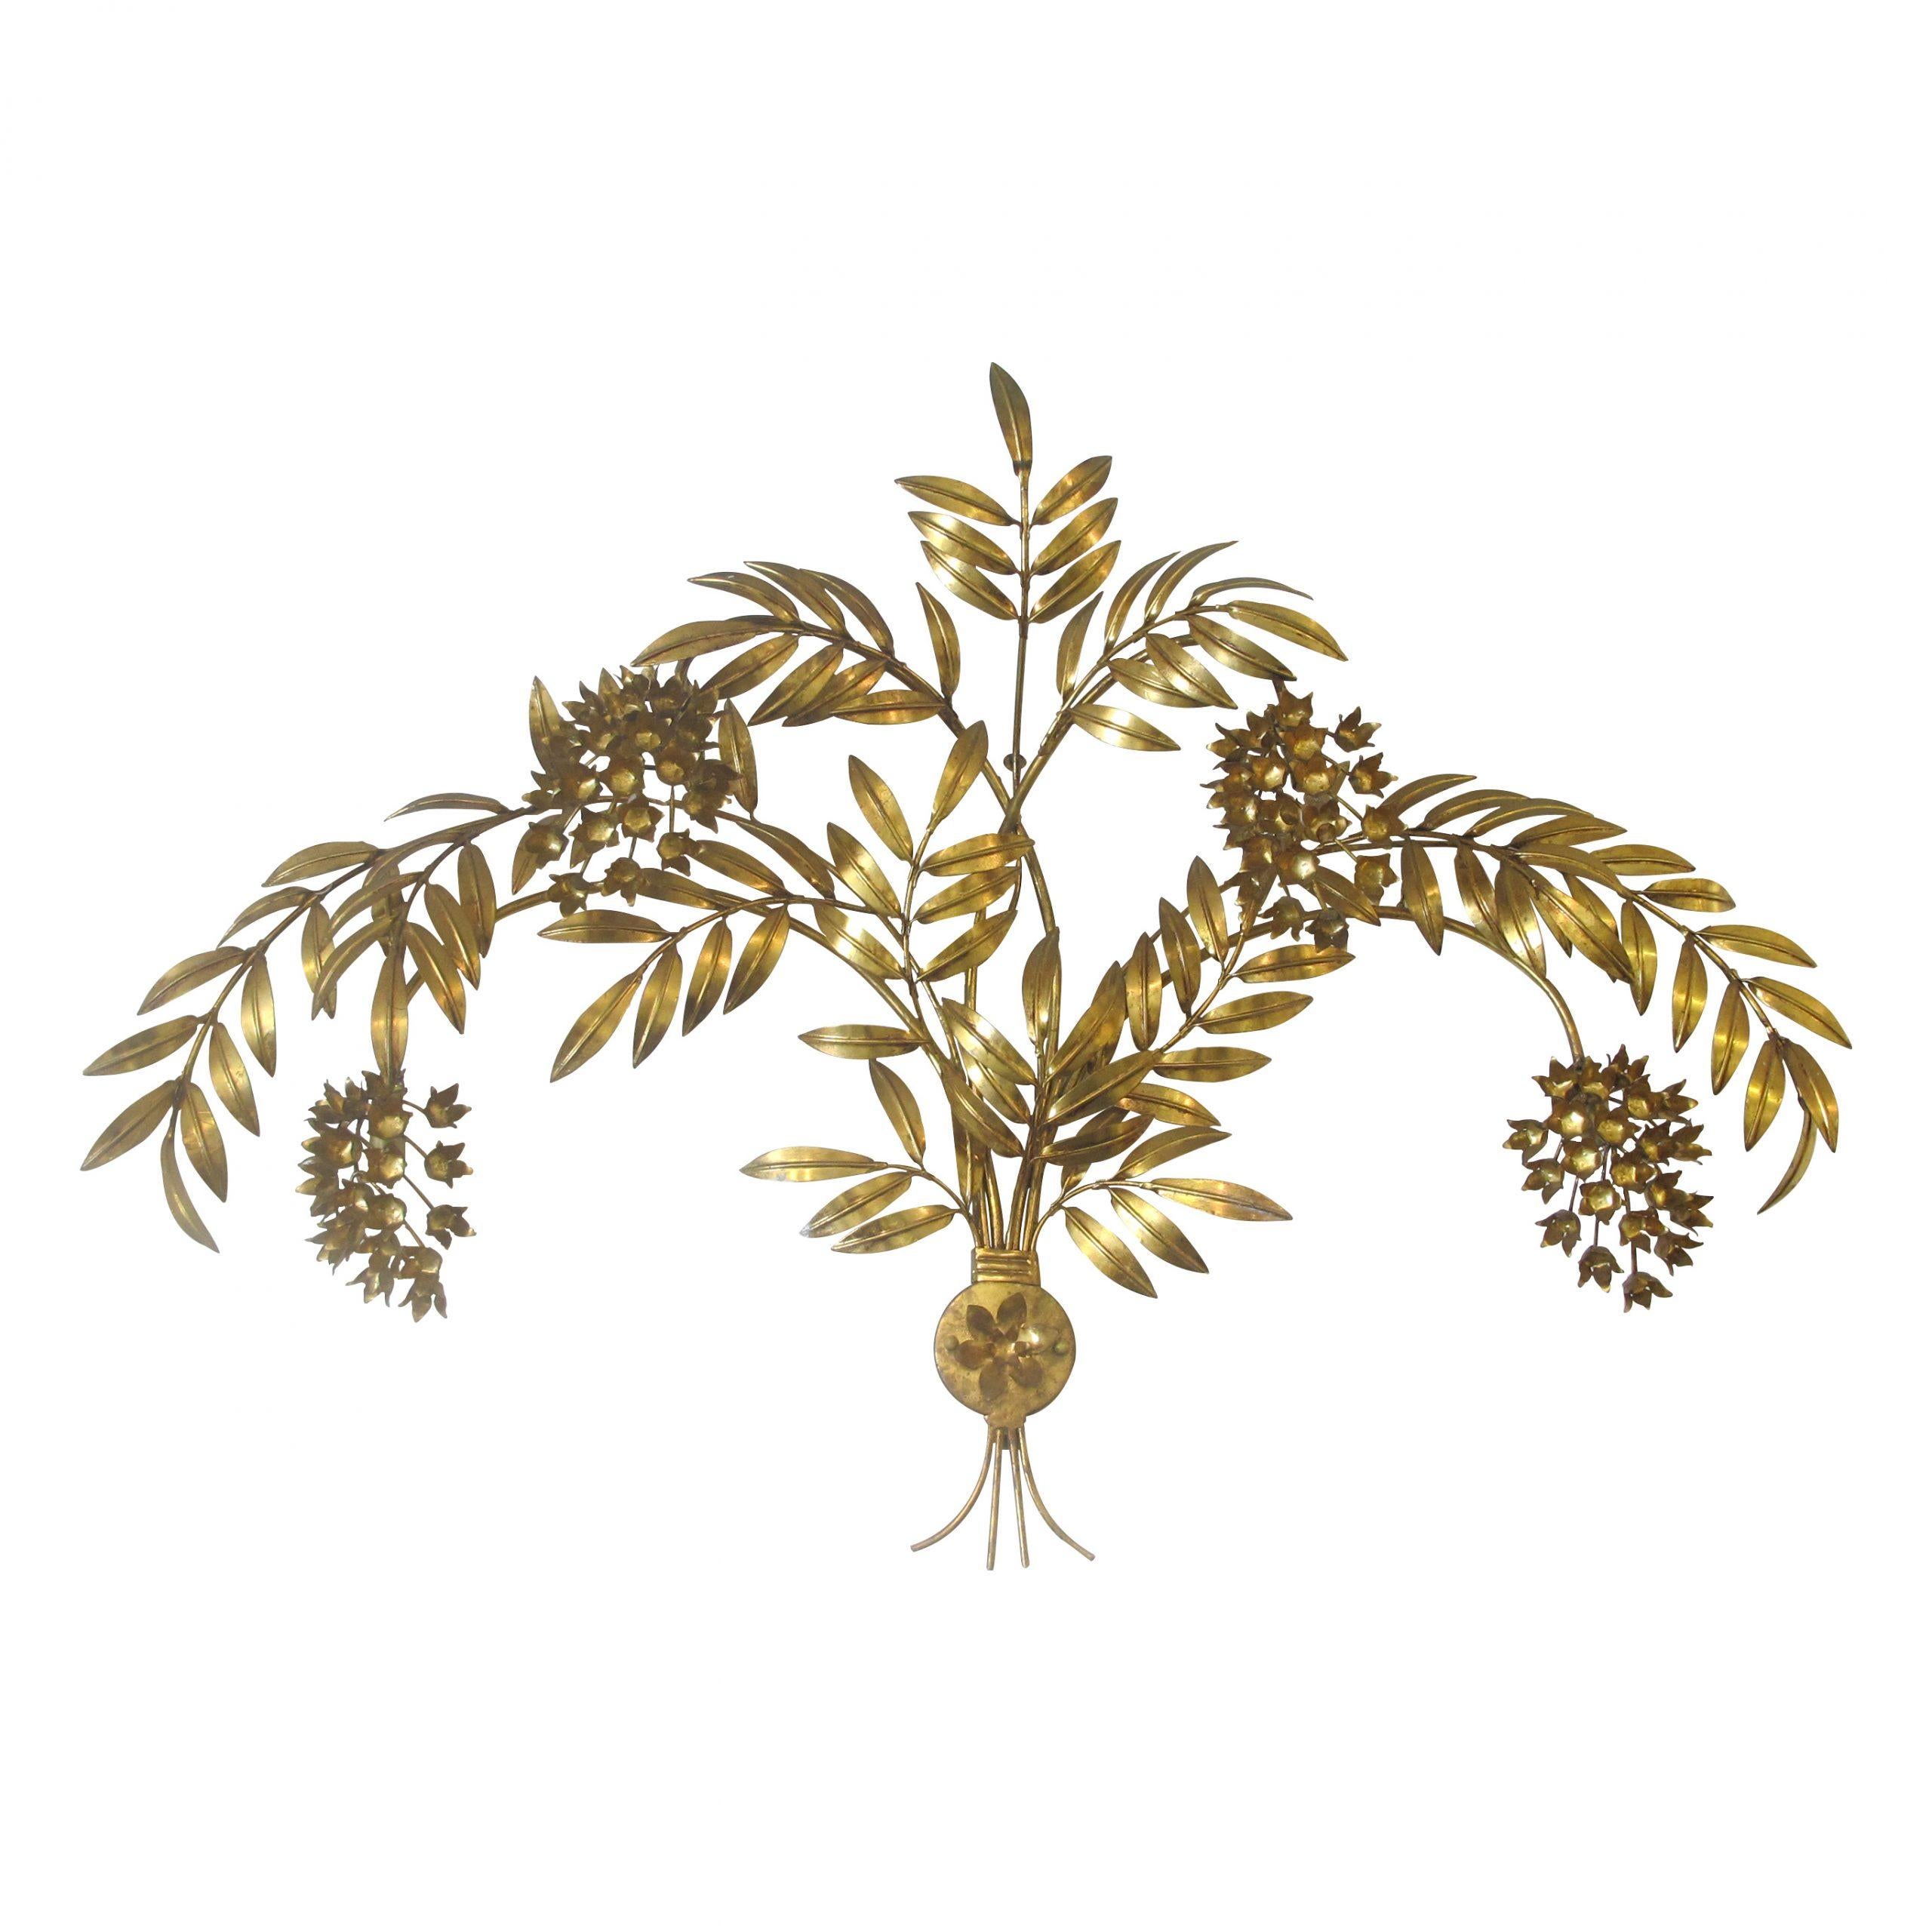 A large gilt metal Wisteria wall light - model “Pioggia d'Ore” by Hans Kögl. Made in Germany during the 1960s. This beautifully made and decorative structural wall light has four-light bulbs which are hidden underneath each of the bunches of grapes.